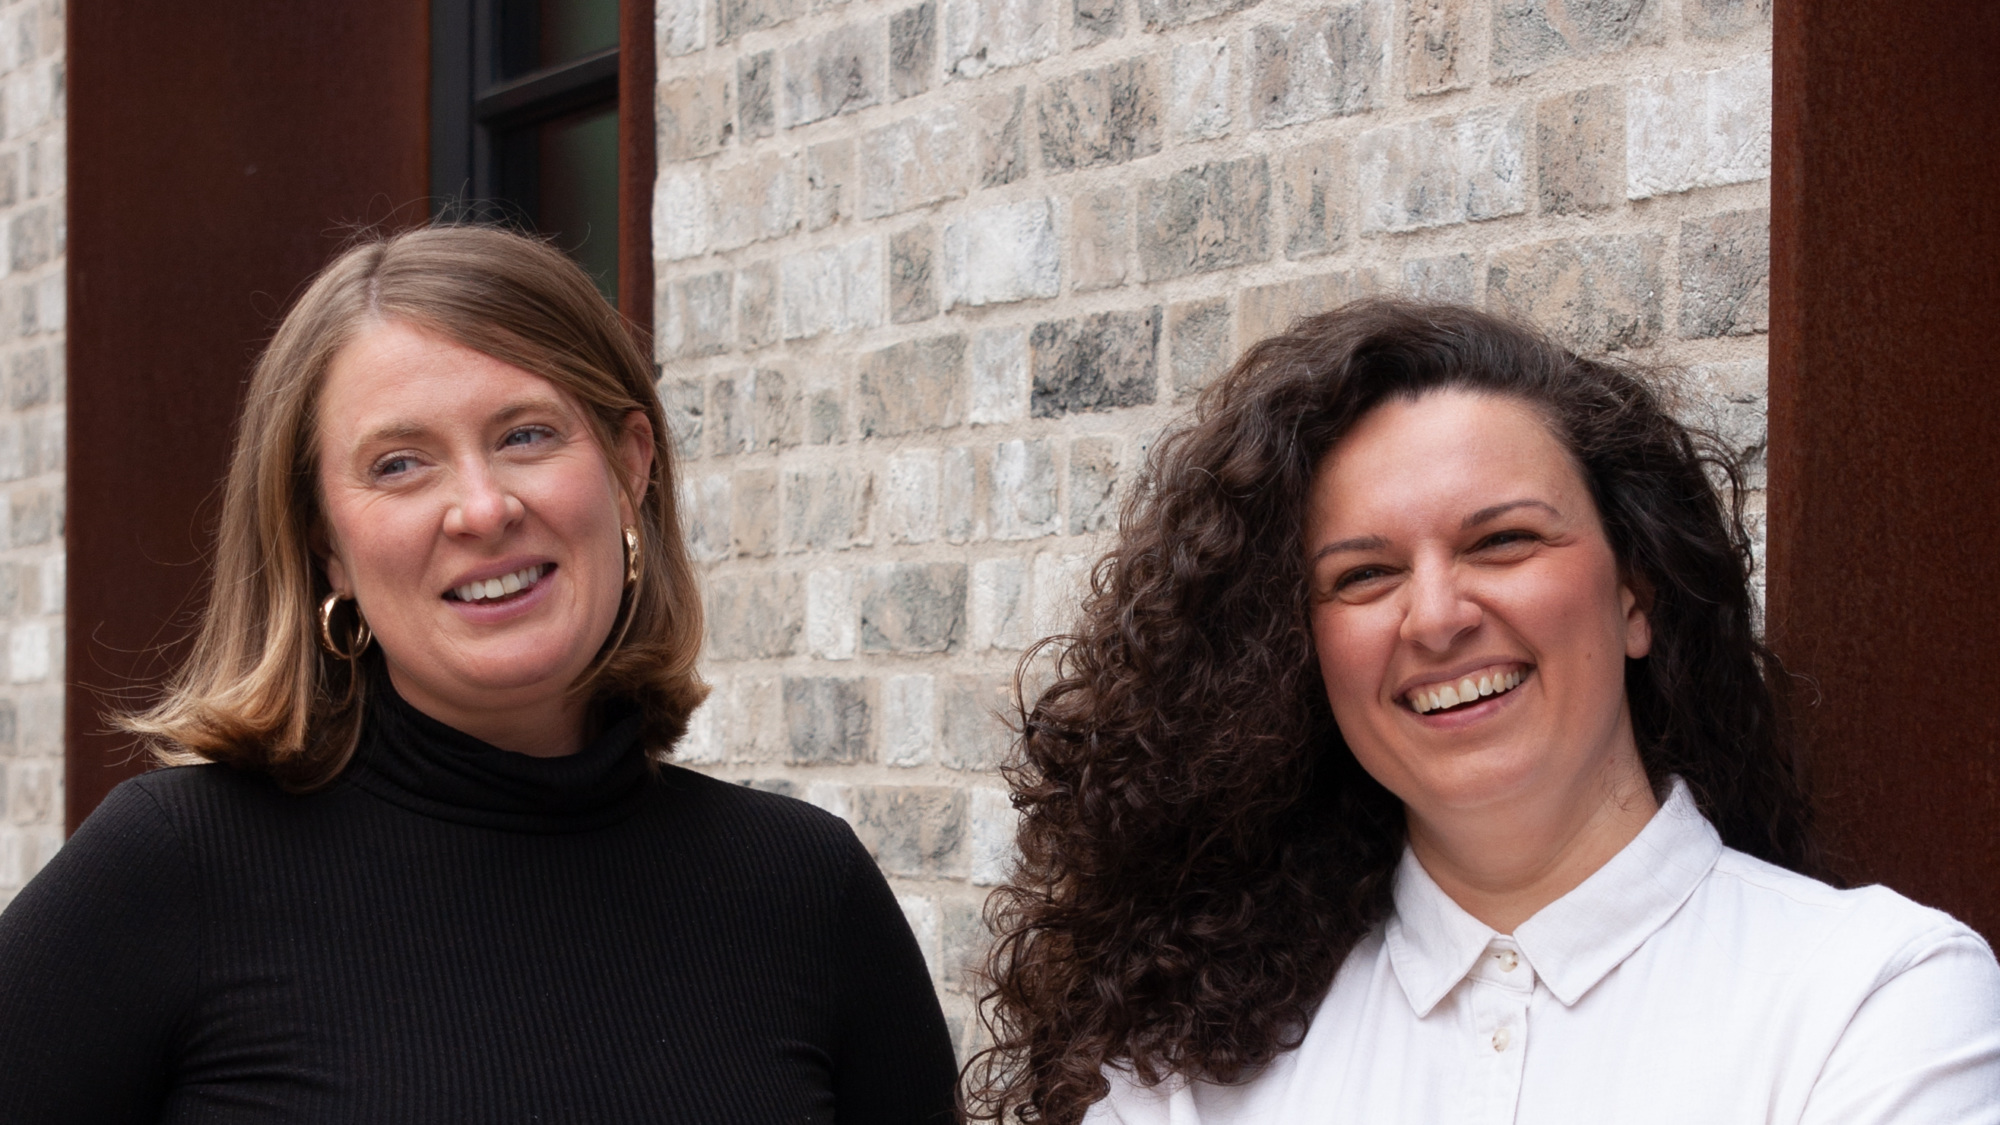 Oklava’s Founders On Why The Restaurant Industry Needs More Action – And Less Lip Service